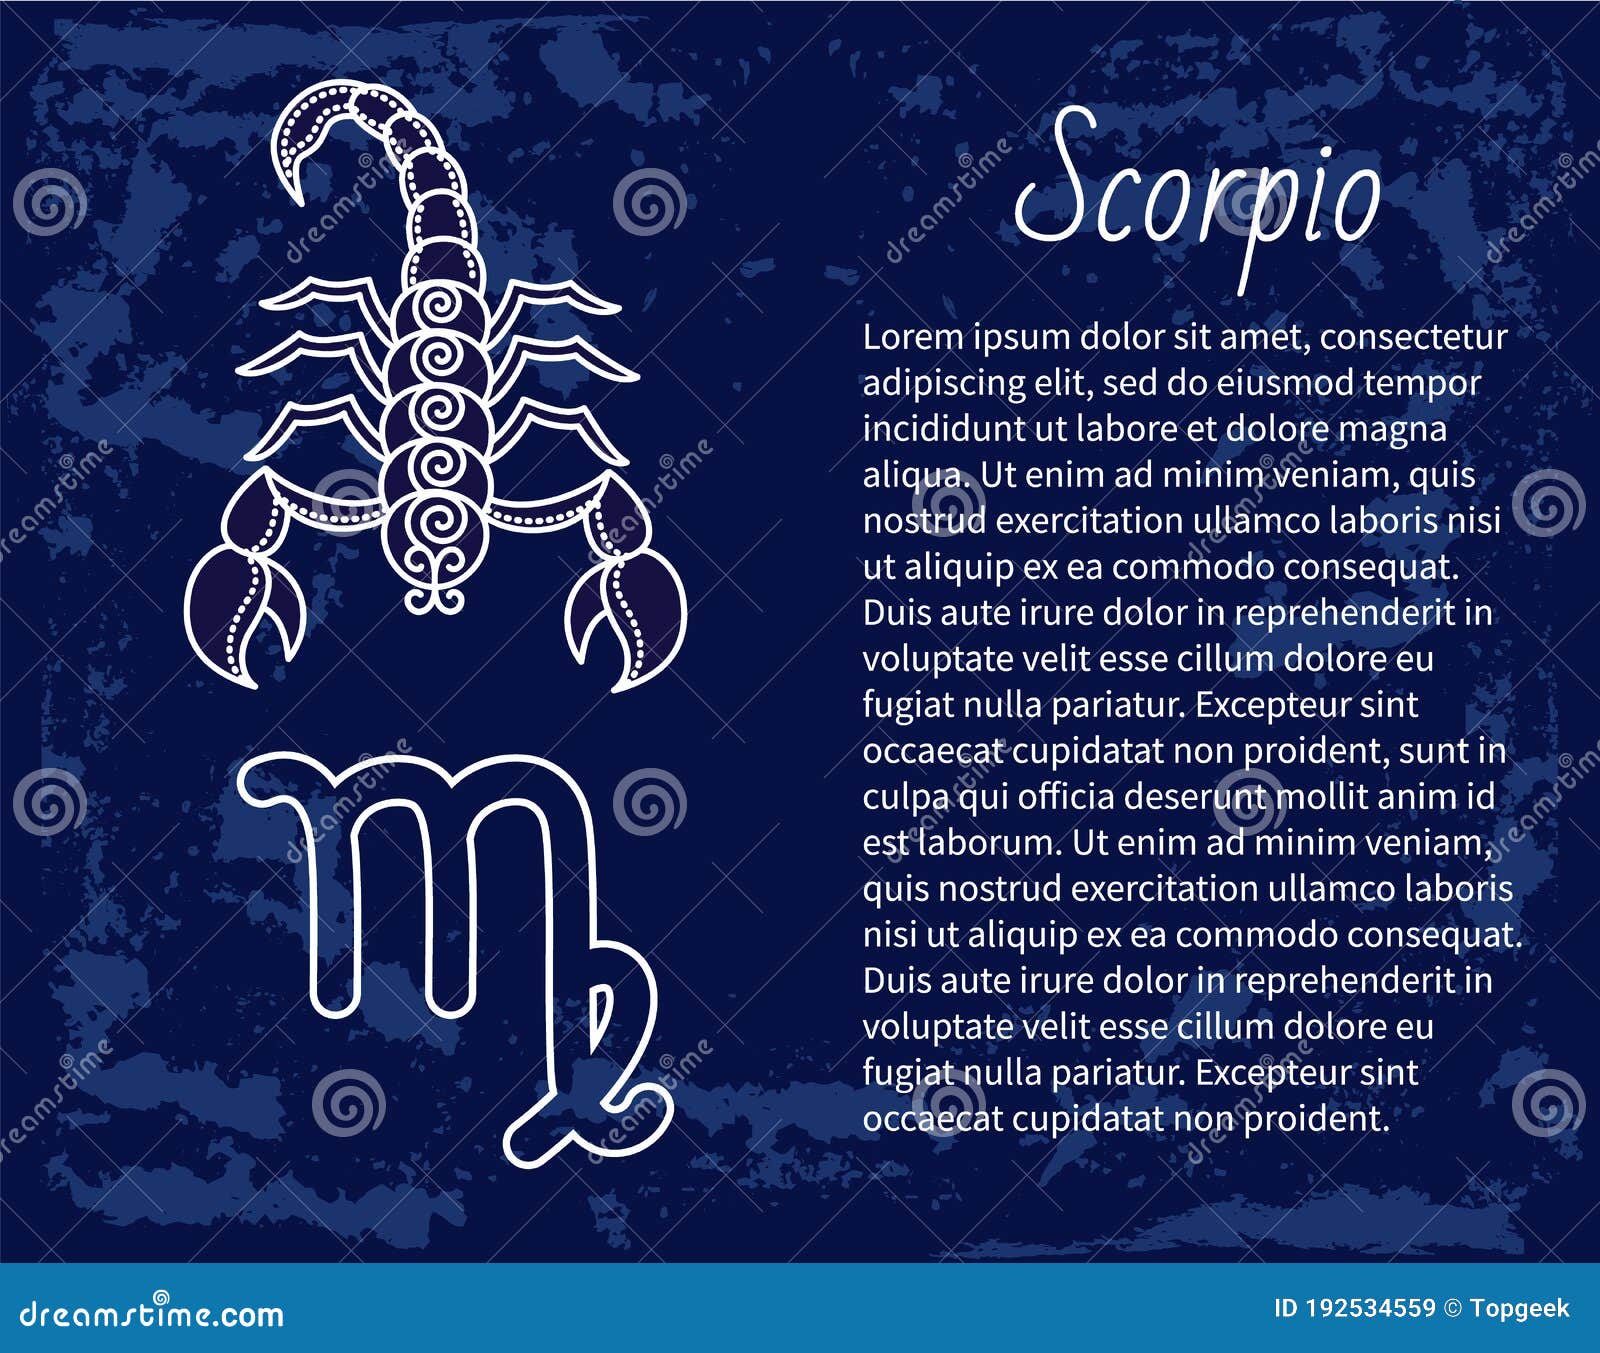 What month is for Scorpio?